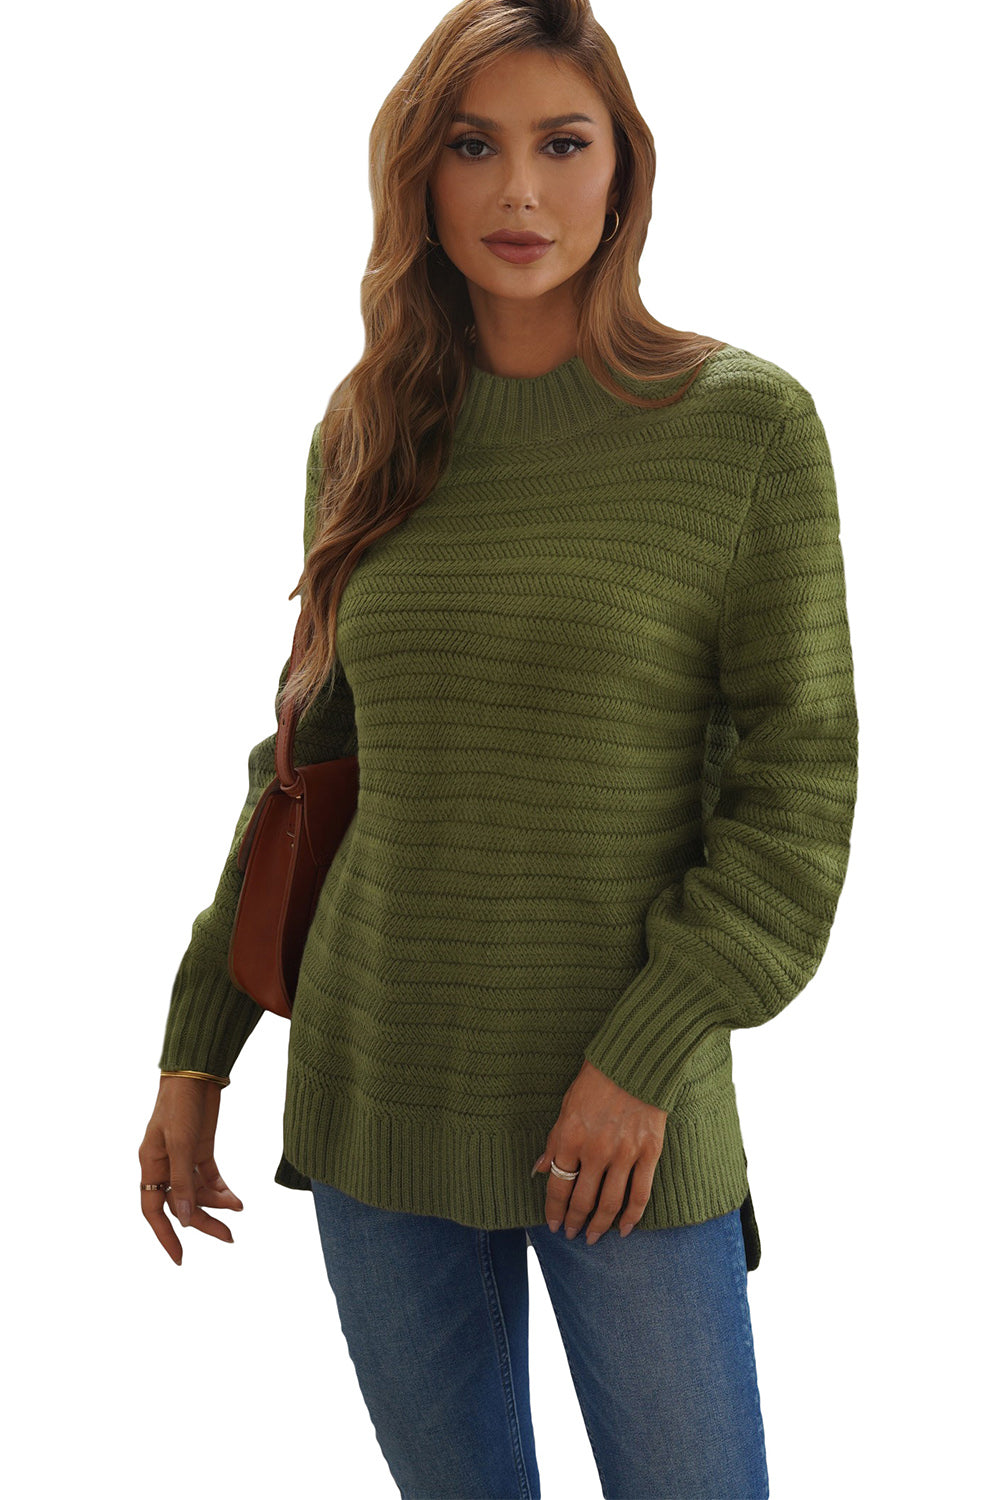 Winter Green Solid Color Stand Collar Textured Sweater